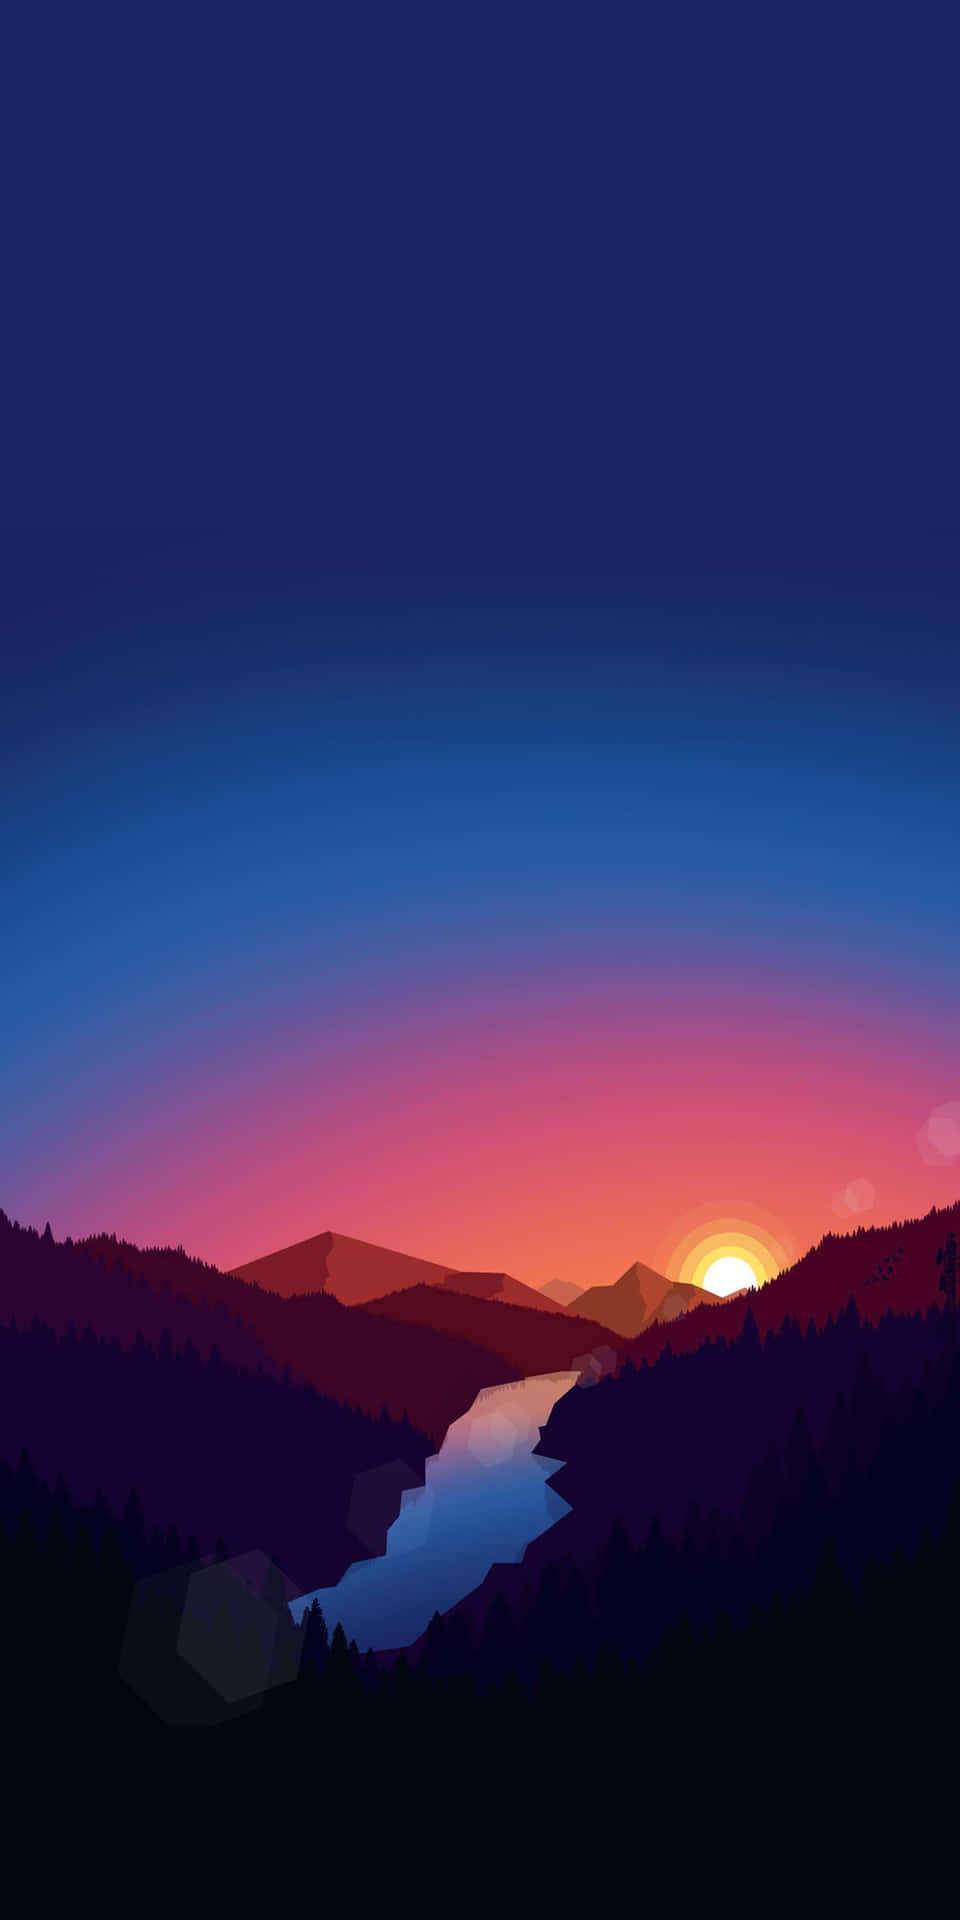 take in the beauty of a sunrise with an iPhone Wallpaper